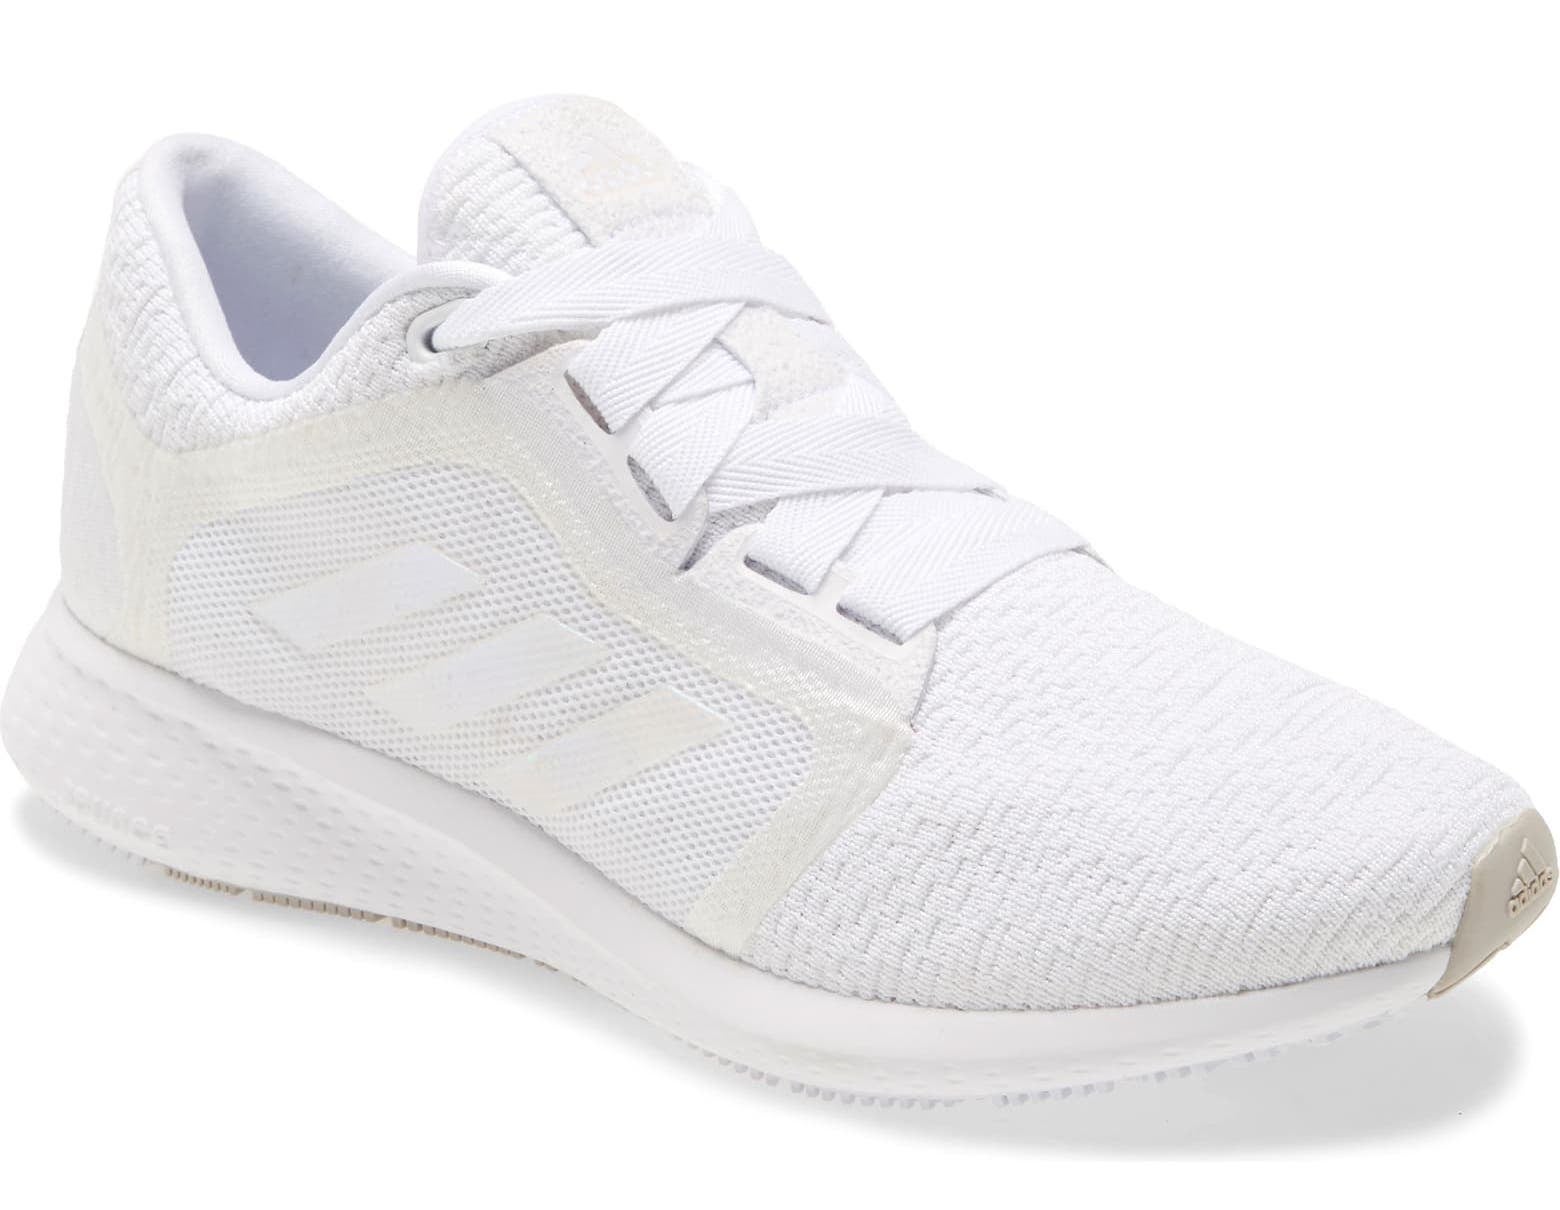 adidas shoes sale 50 off